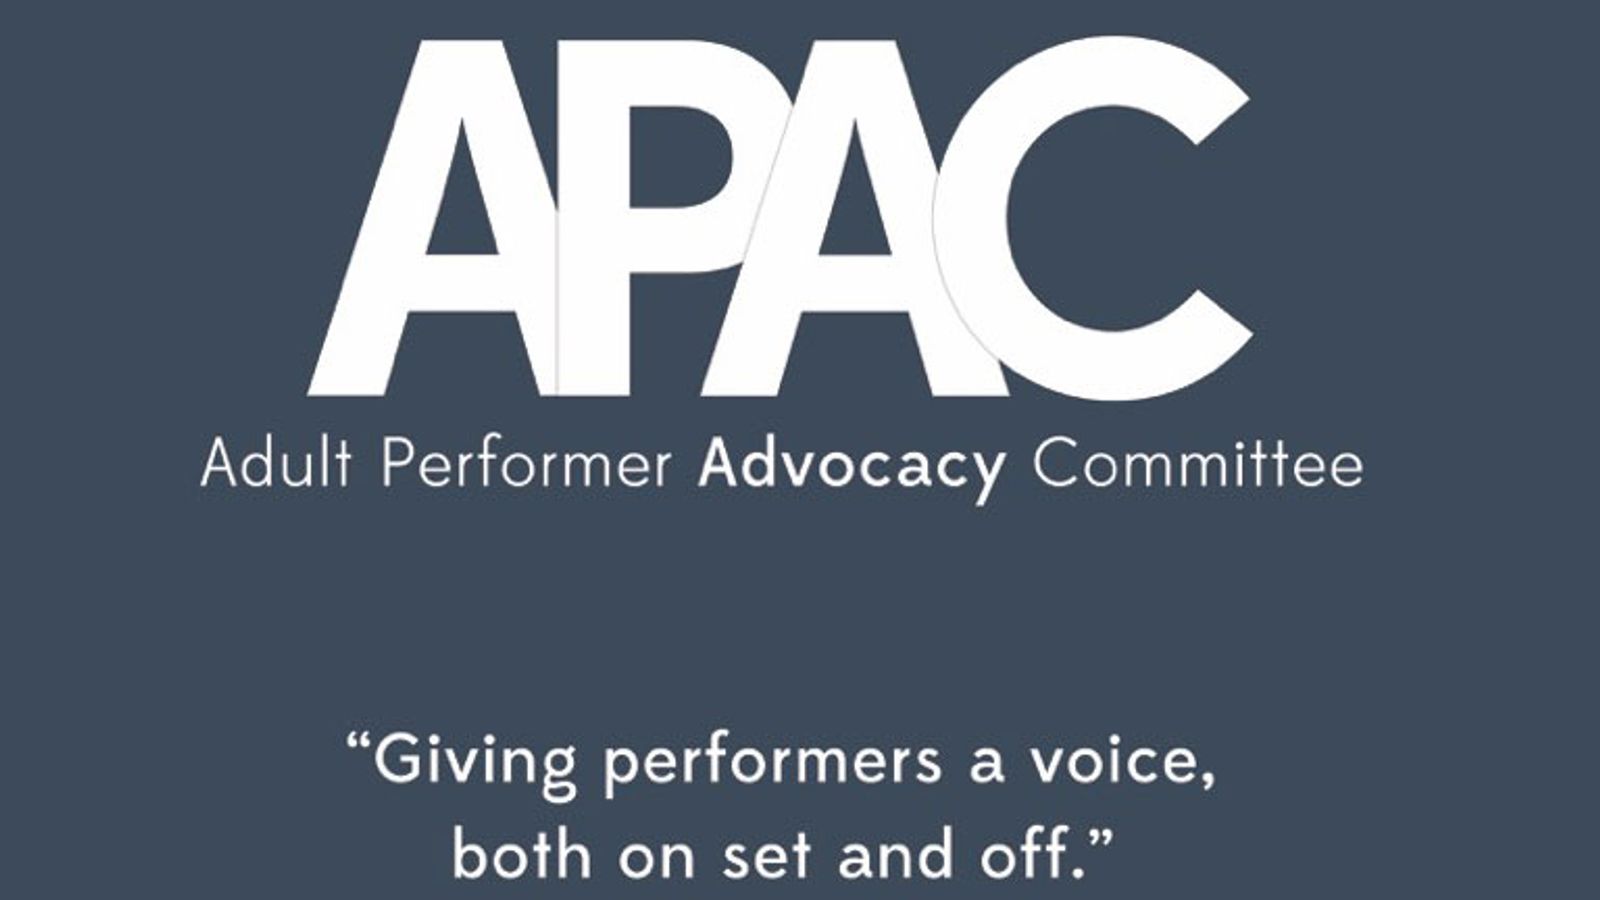 APAC Meeting This Sunday To Give Guidance on Performer Health